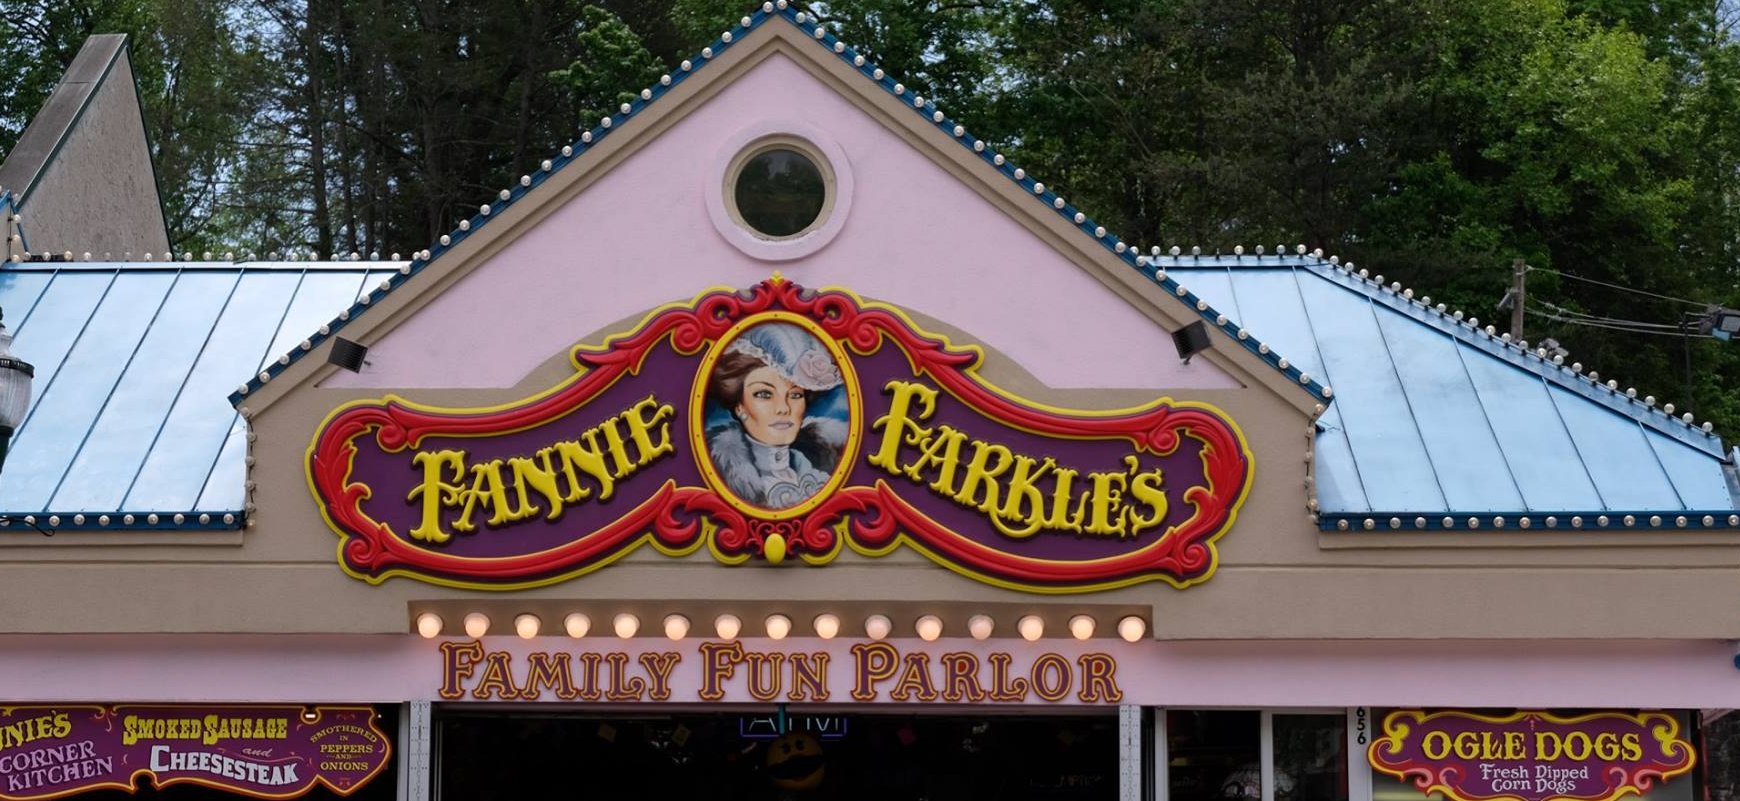 Fannie Farkle's in Gatlinburg: Food and Fun For the Family